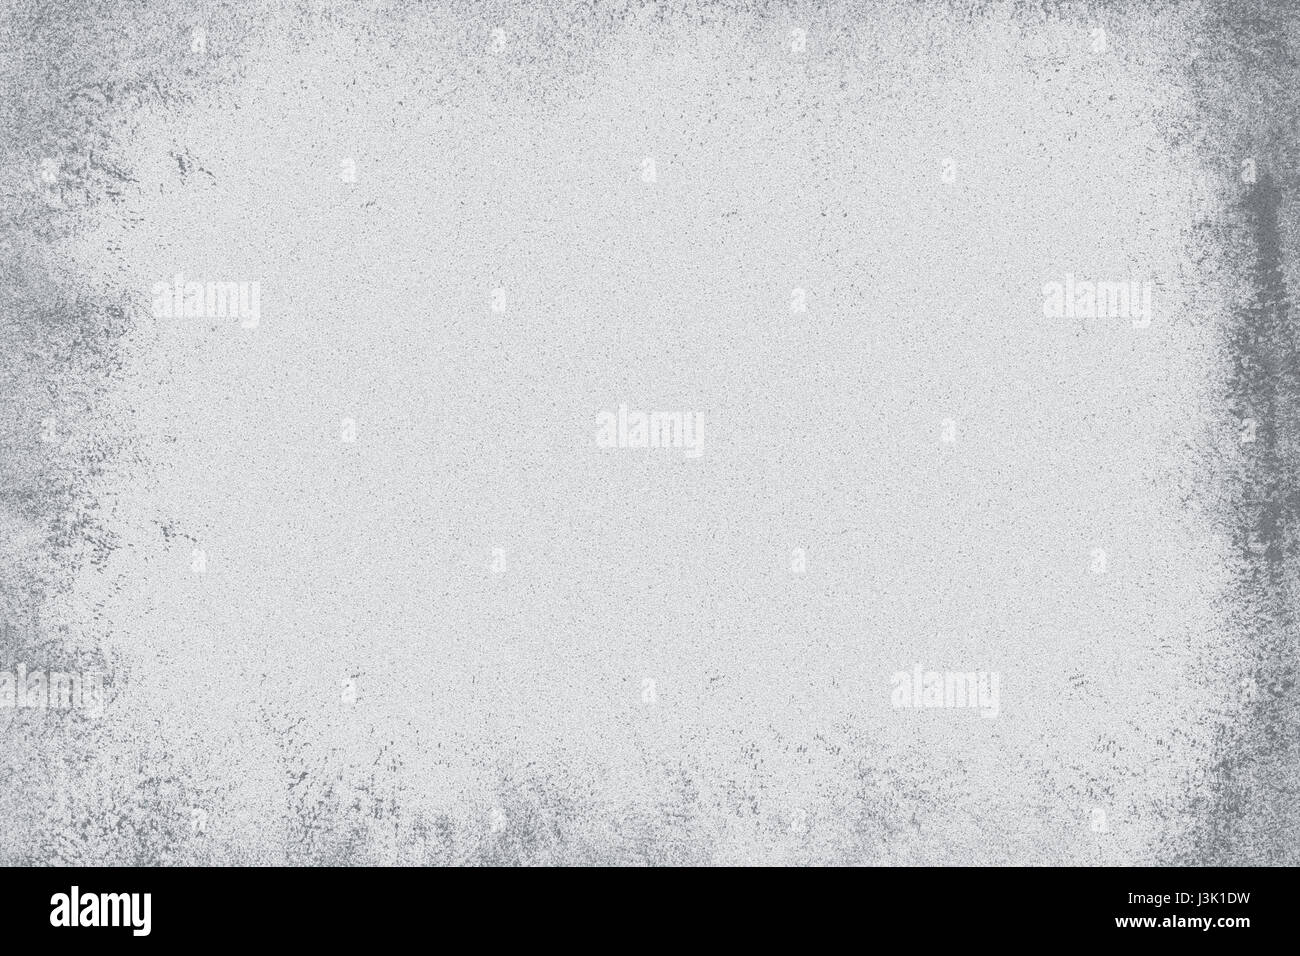 Grunge textured light background. Beautiful abstract background Stock Photo